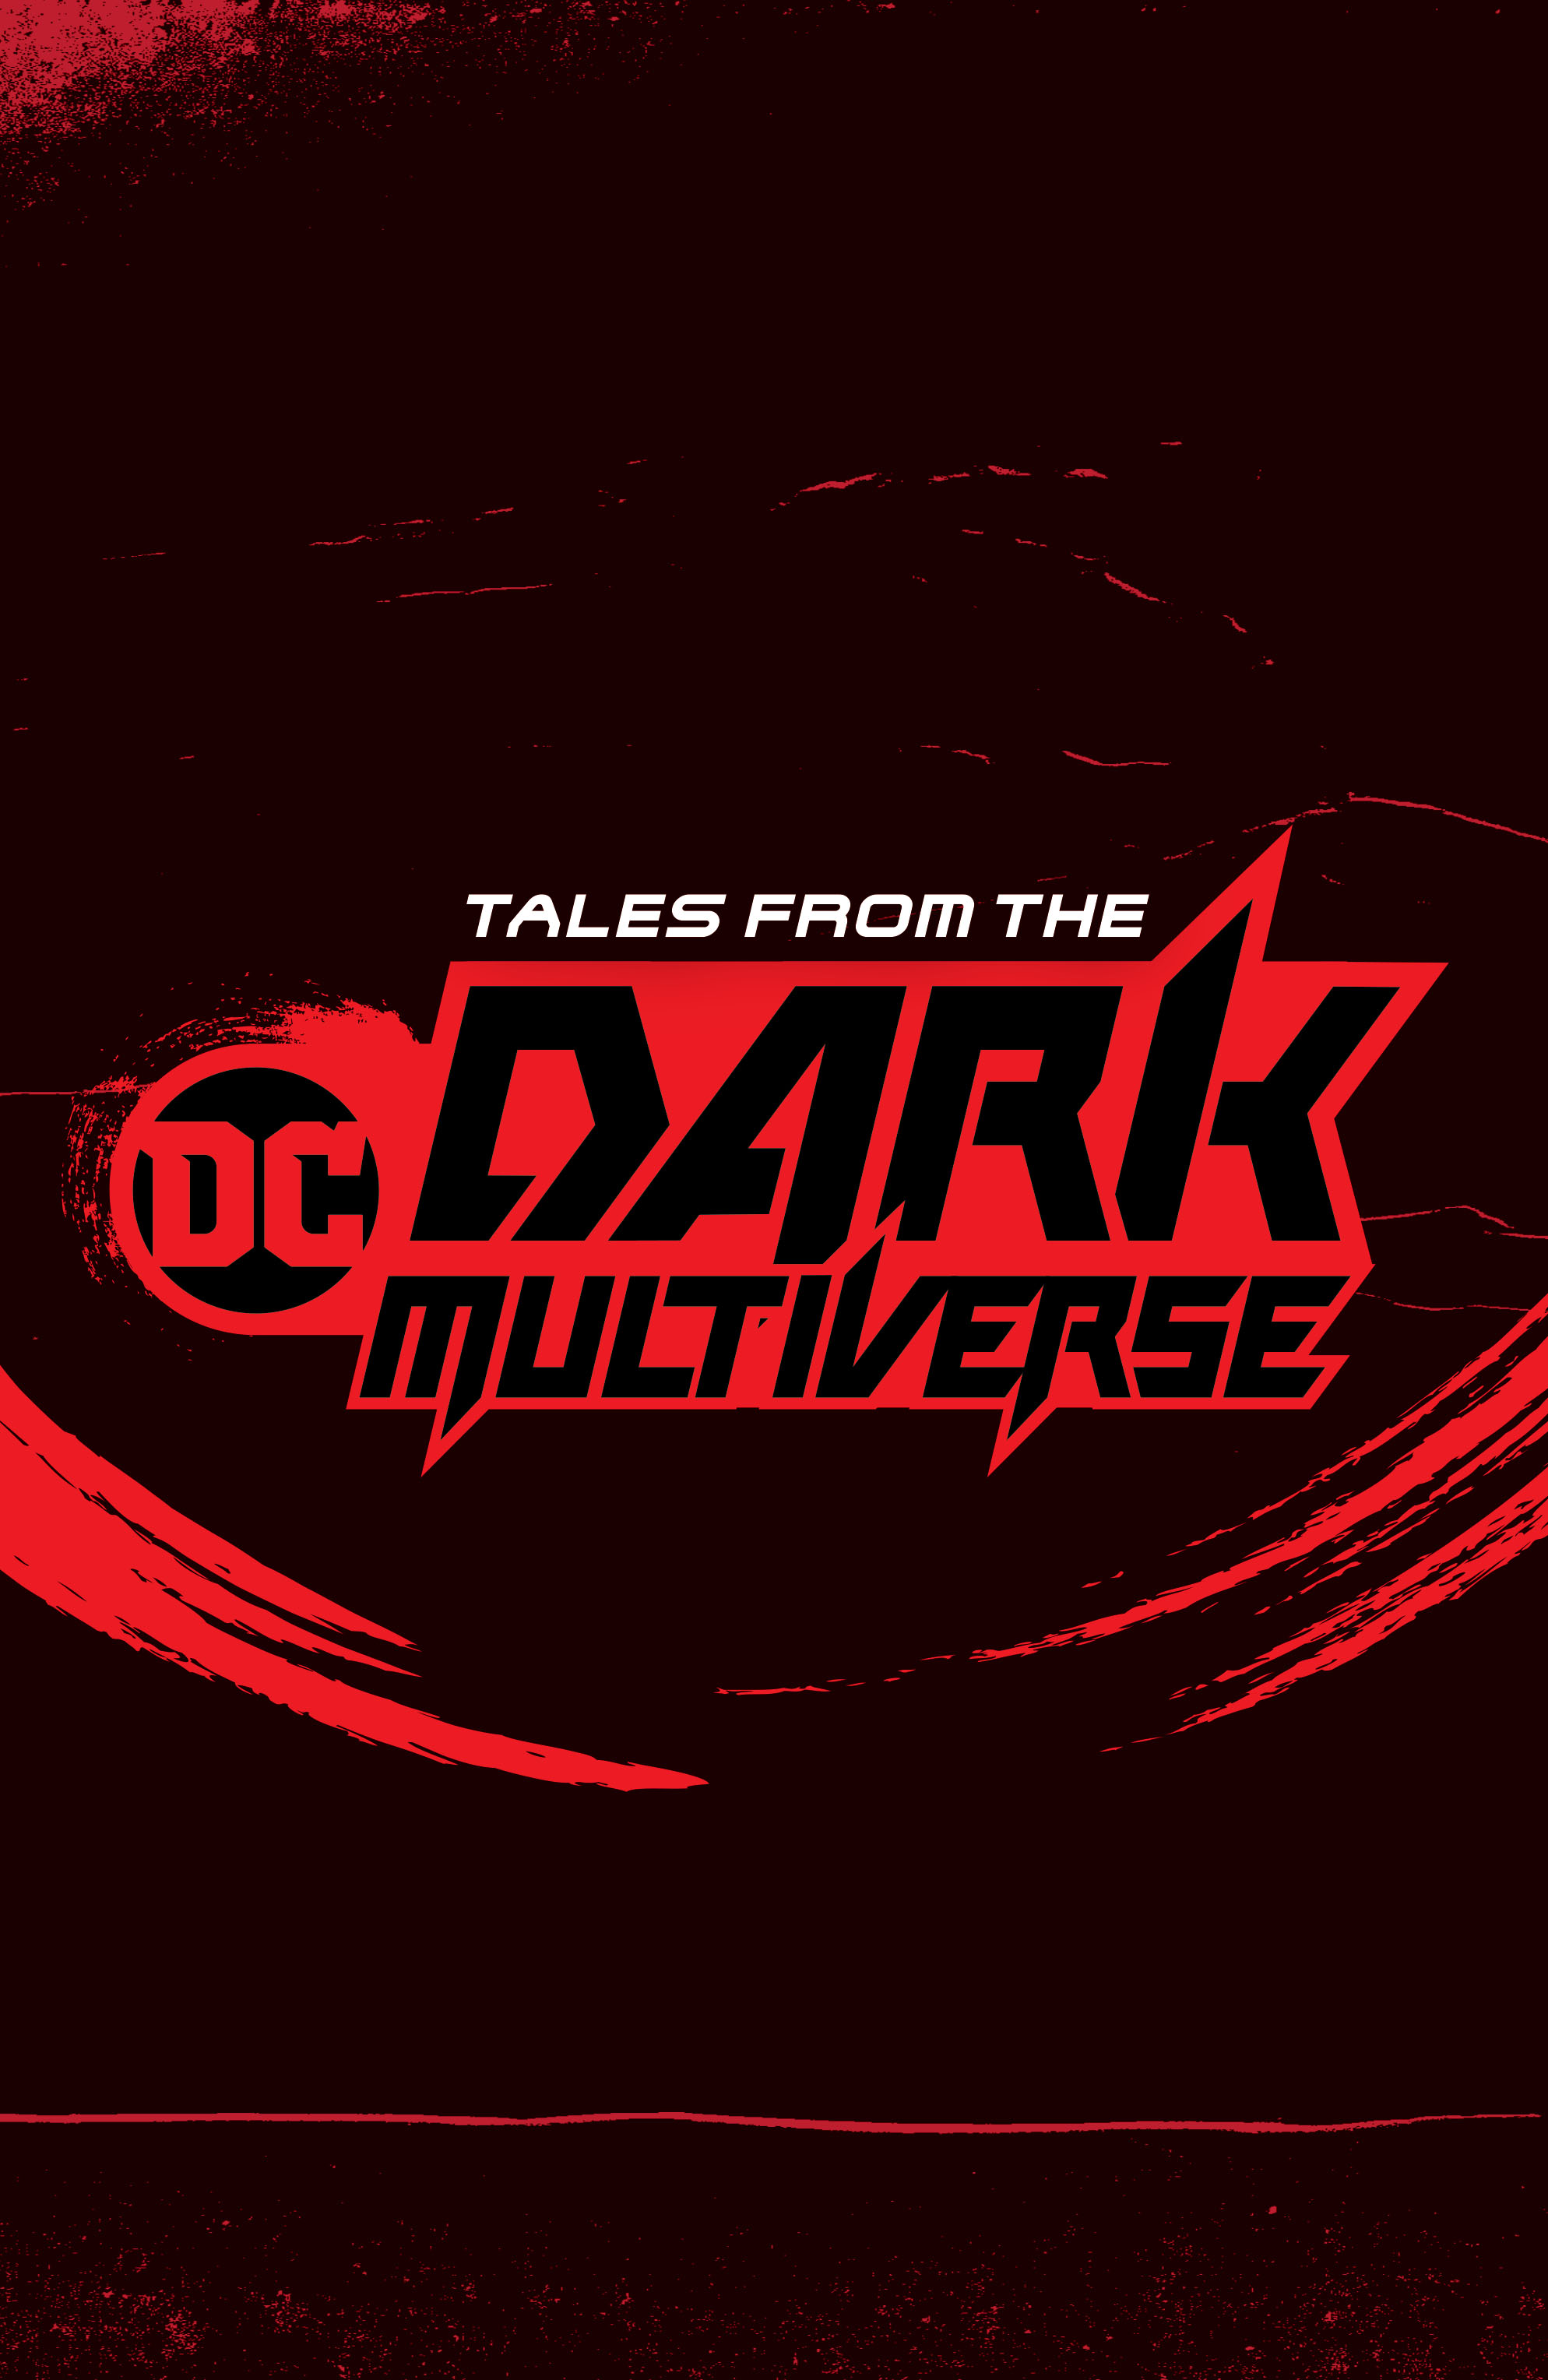 Tales from the DC Dark Multiverse (2020): Chapter 1 - Page 2